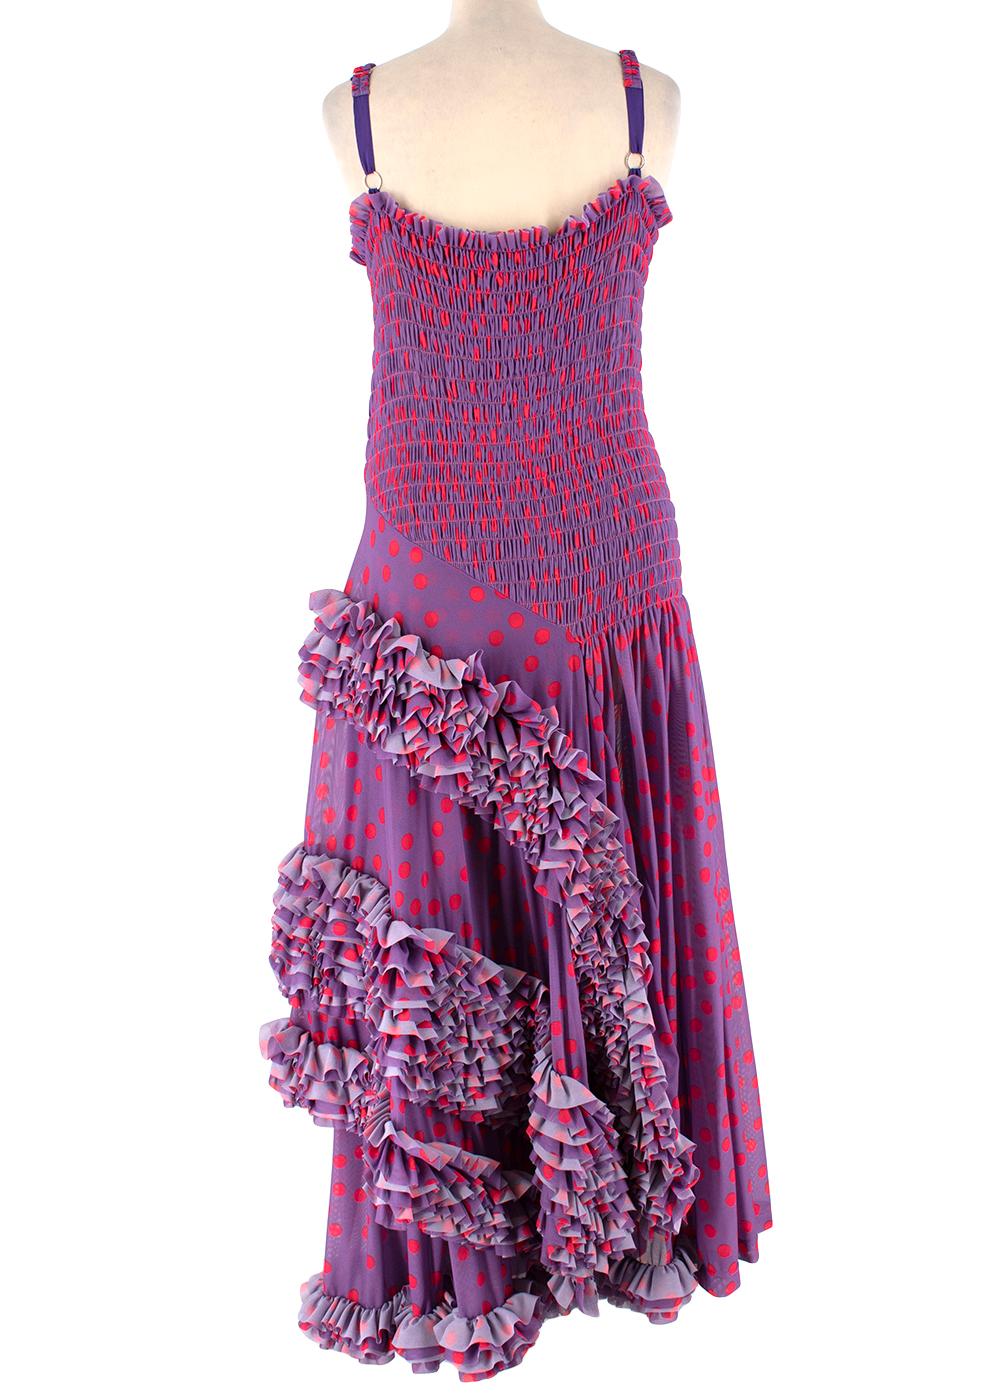 Molly Goddard Runway Lilac Polka Dot Ruffled Midi Dress - Size US 6 In New Condition For Sale In London, GB